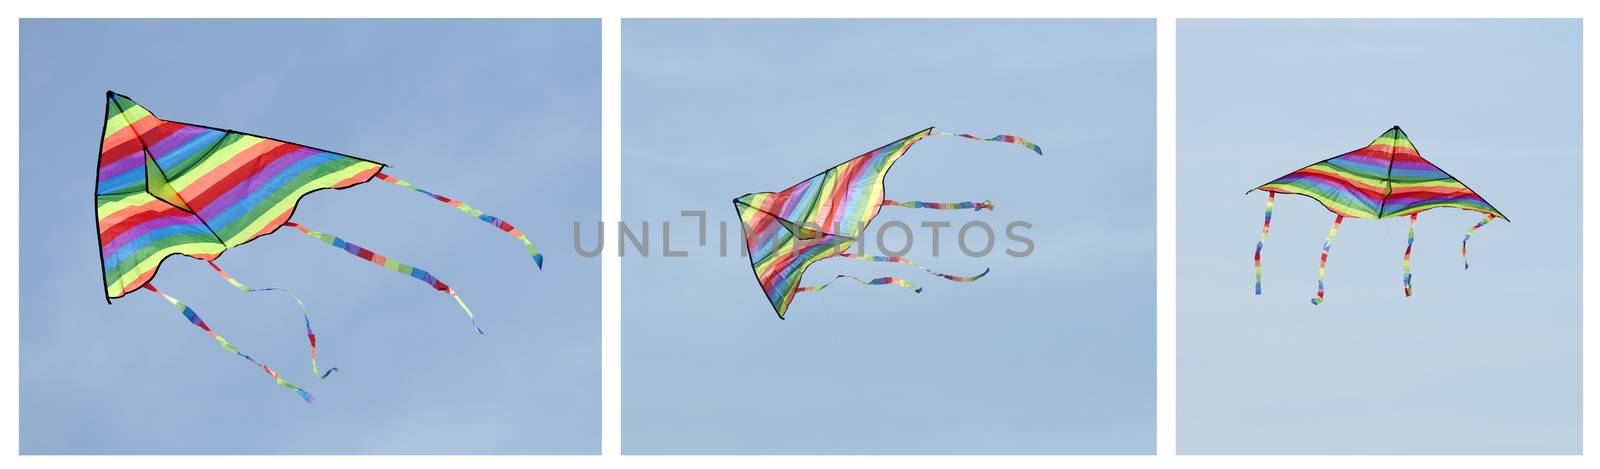 Multicolored kite on blue sky background. Tree images